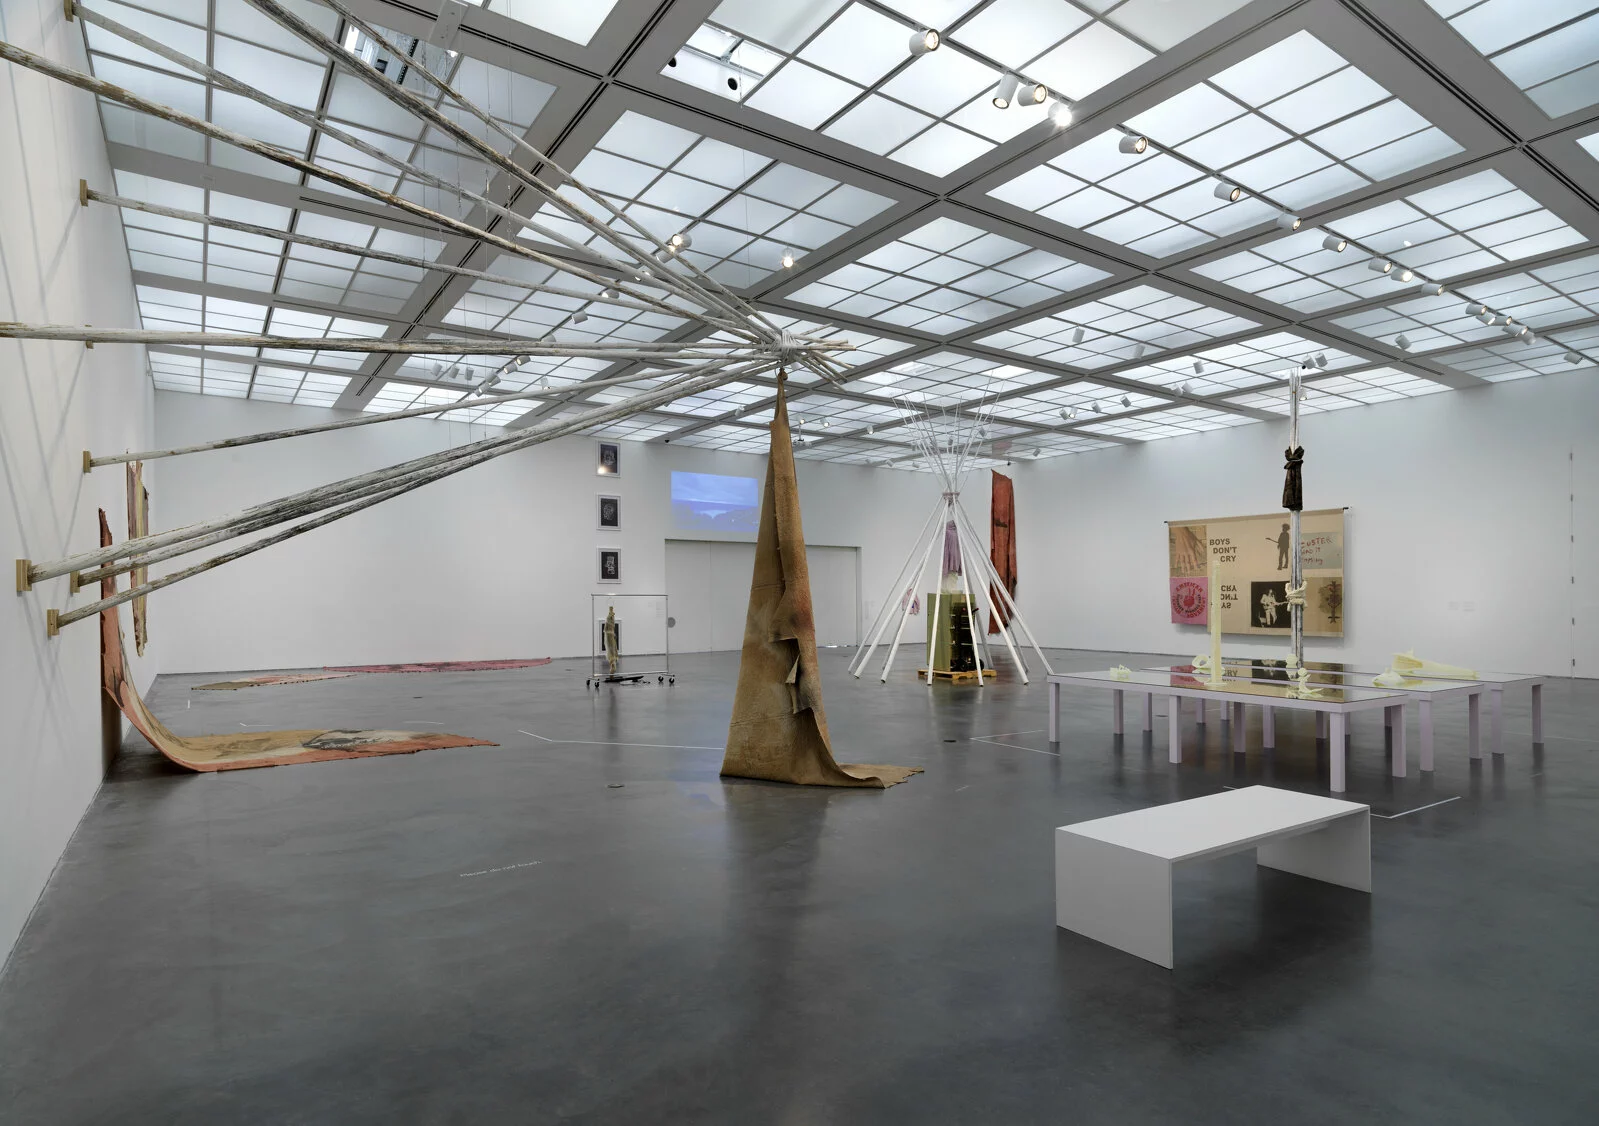 A large gallery space with many artworks installed on the walls and floor, including posts put together in a tipi formation that juts out from the wall.